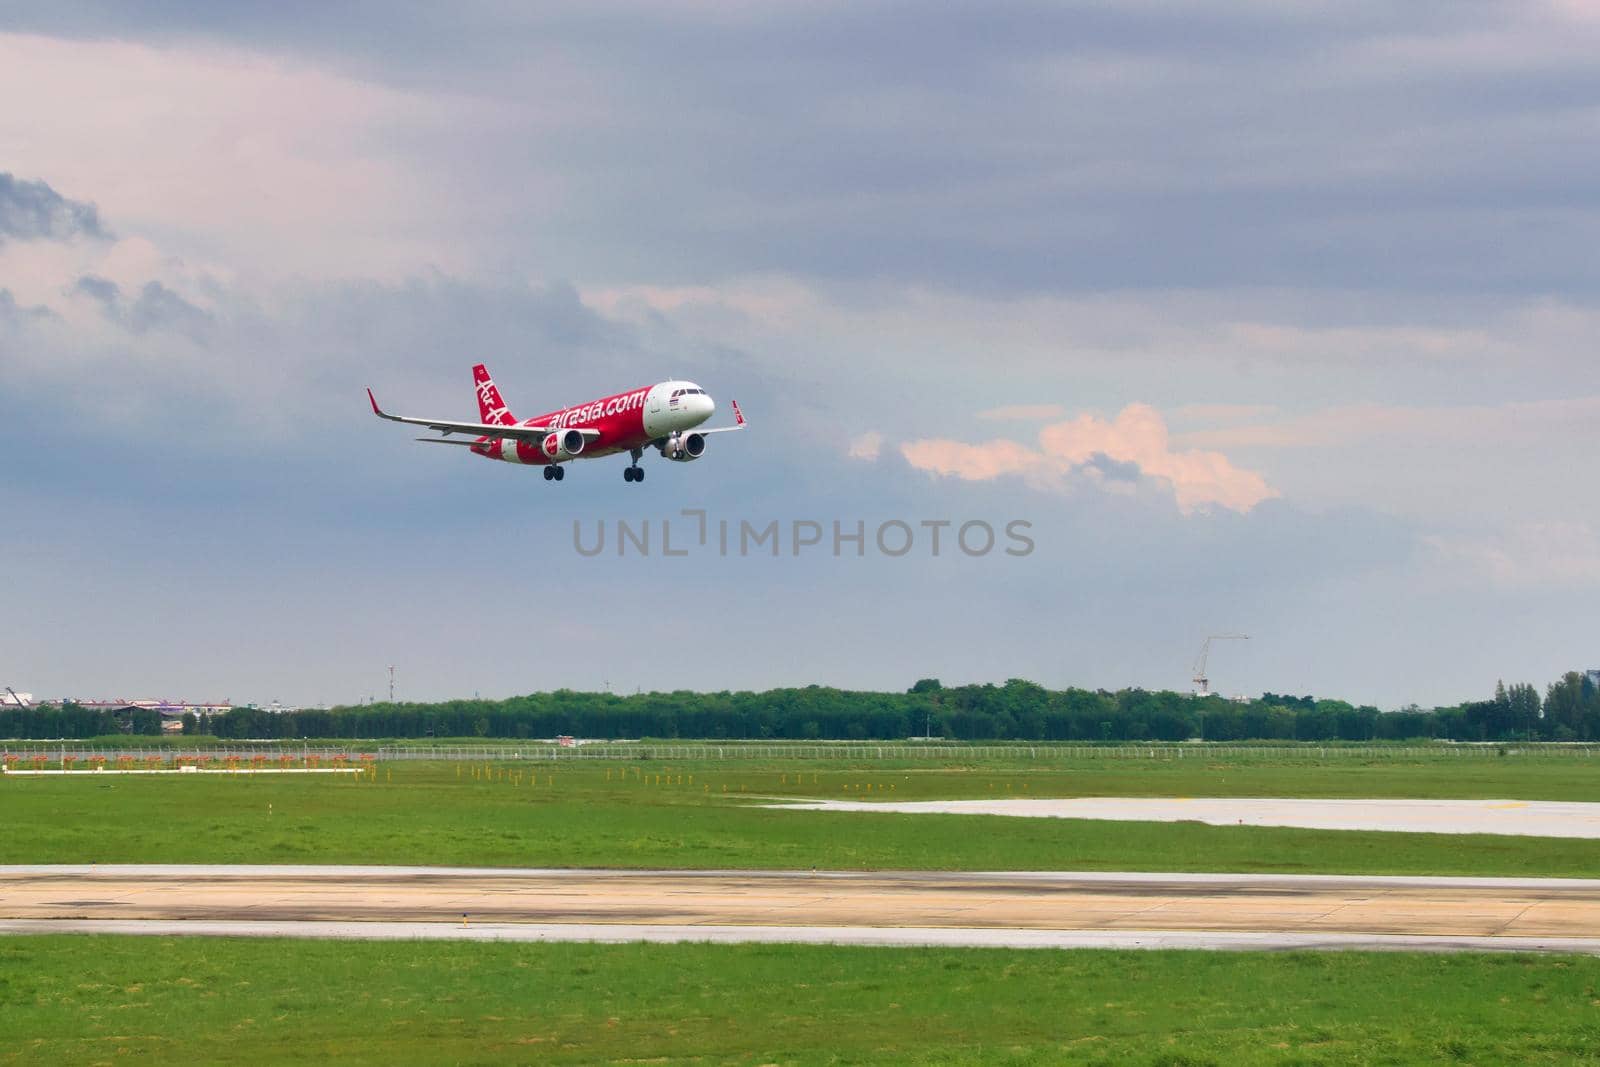 2019-11-14 / Ho Chi Minh City, Vietnam - An Air Asia airliner lining up on the final approach for landing.